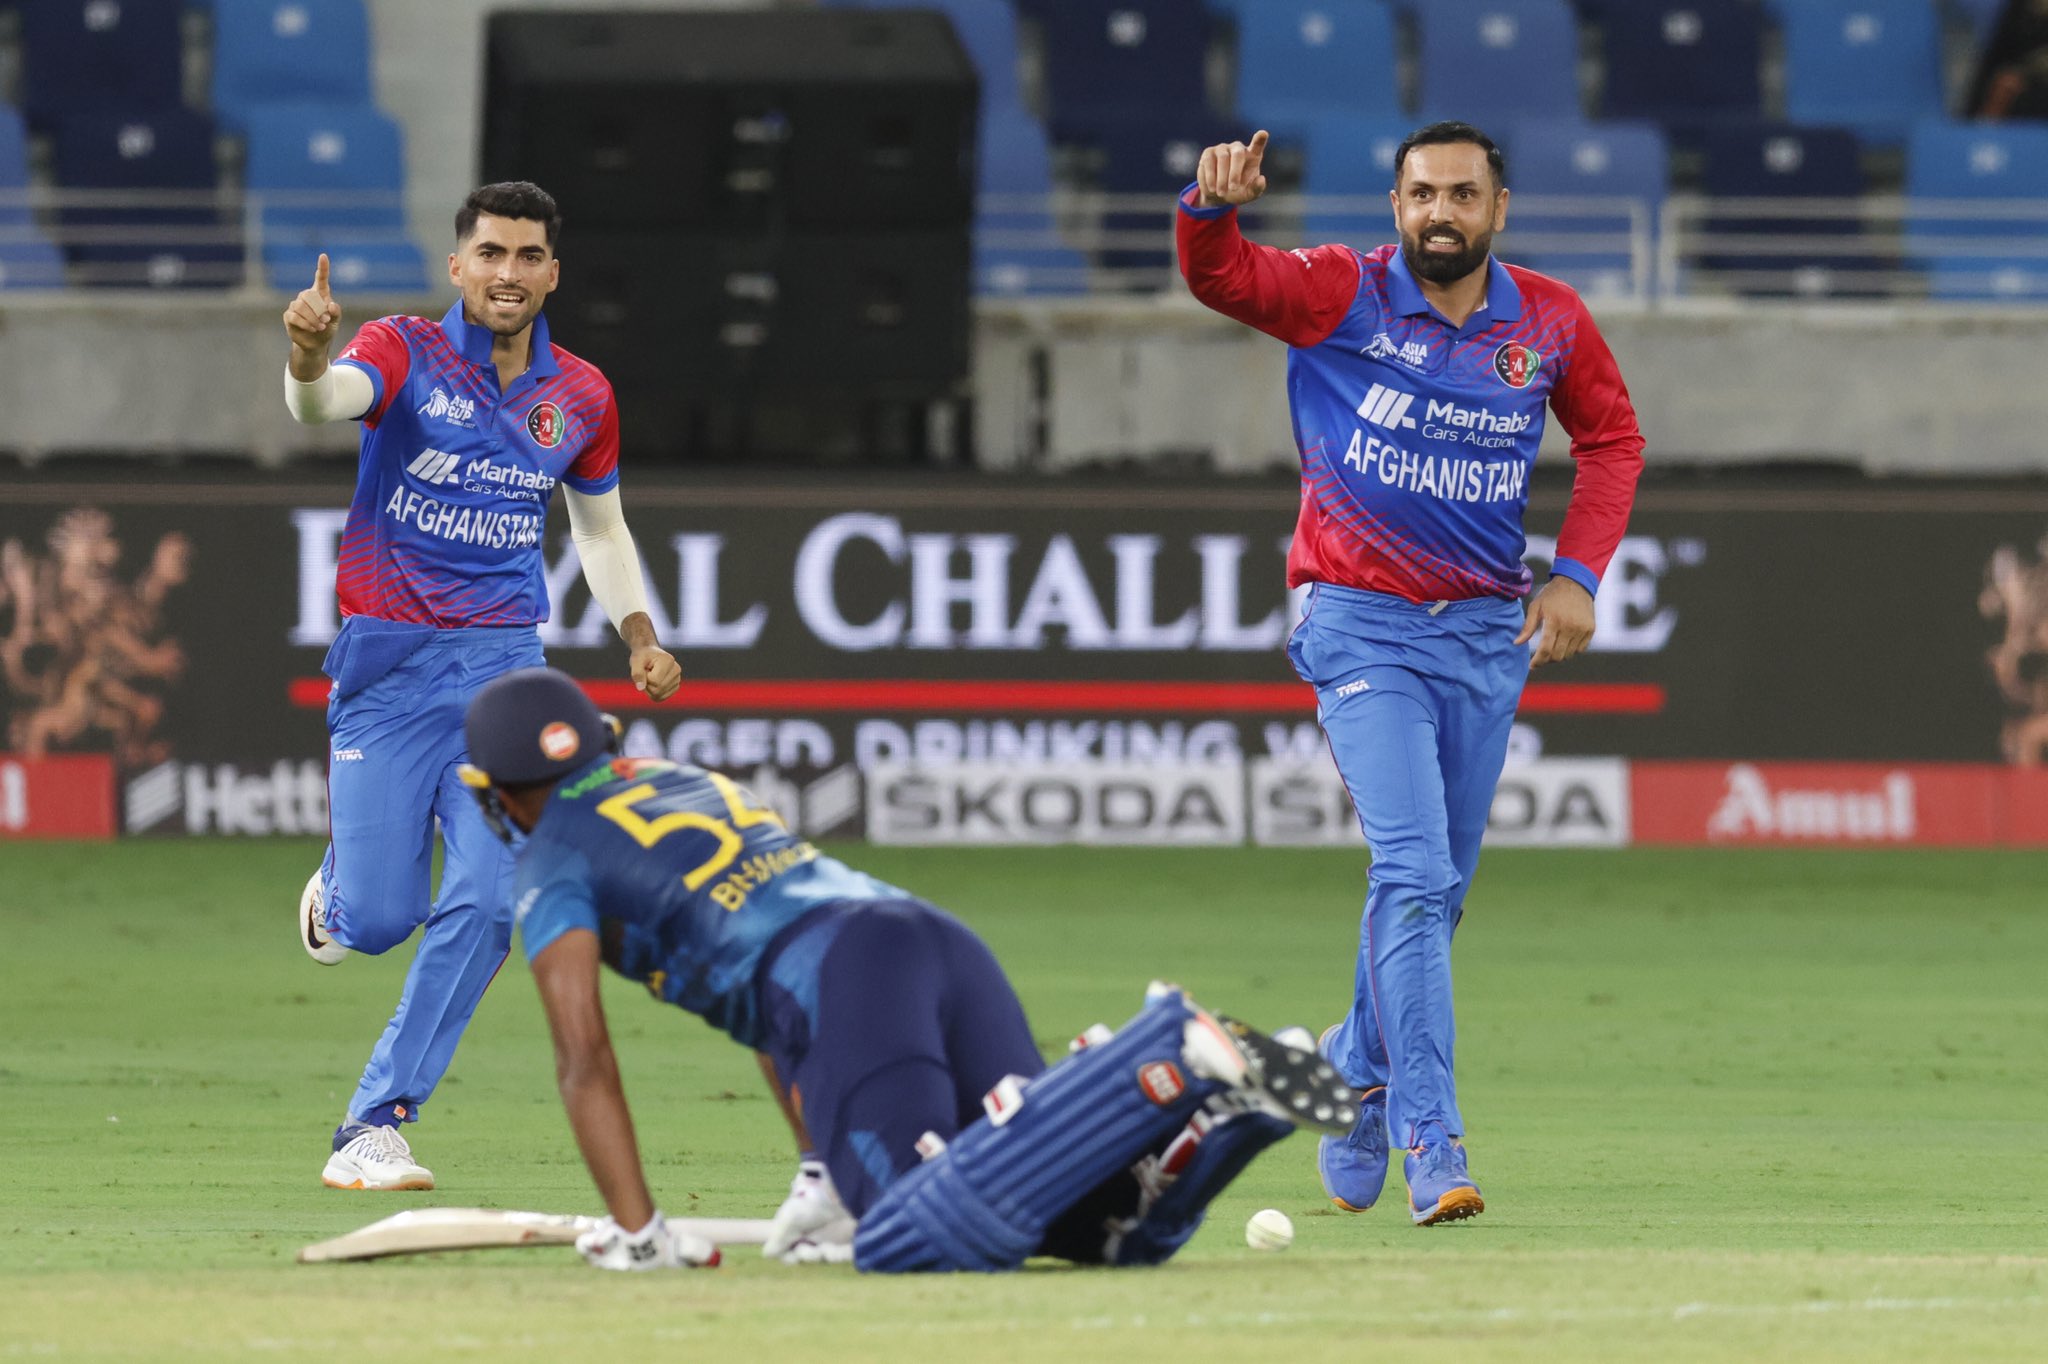 SL vs AFG: Sri Lanka vs Afghanistan Dream11 Prediction, Playing XI, Pitch Report & Injury Update - Asia Cup 2022 Super 4 Match 1